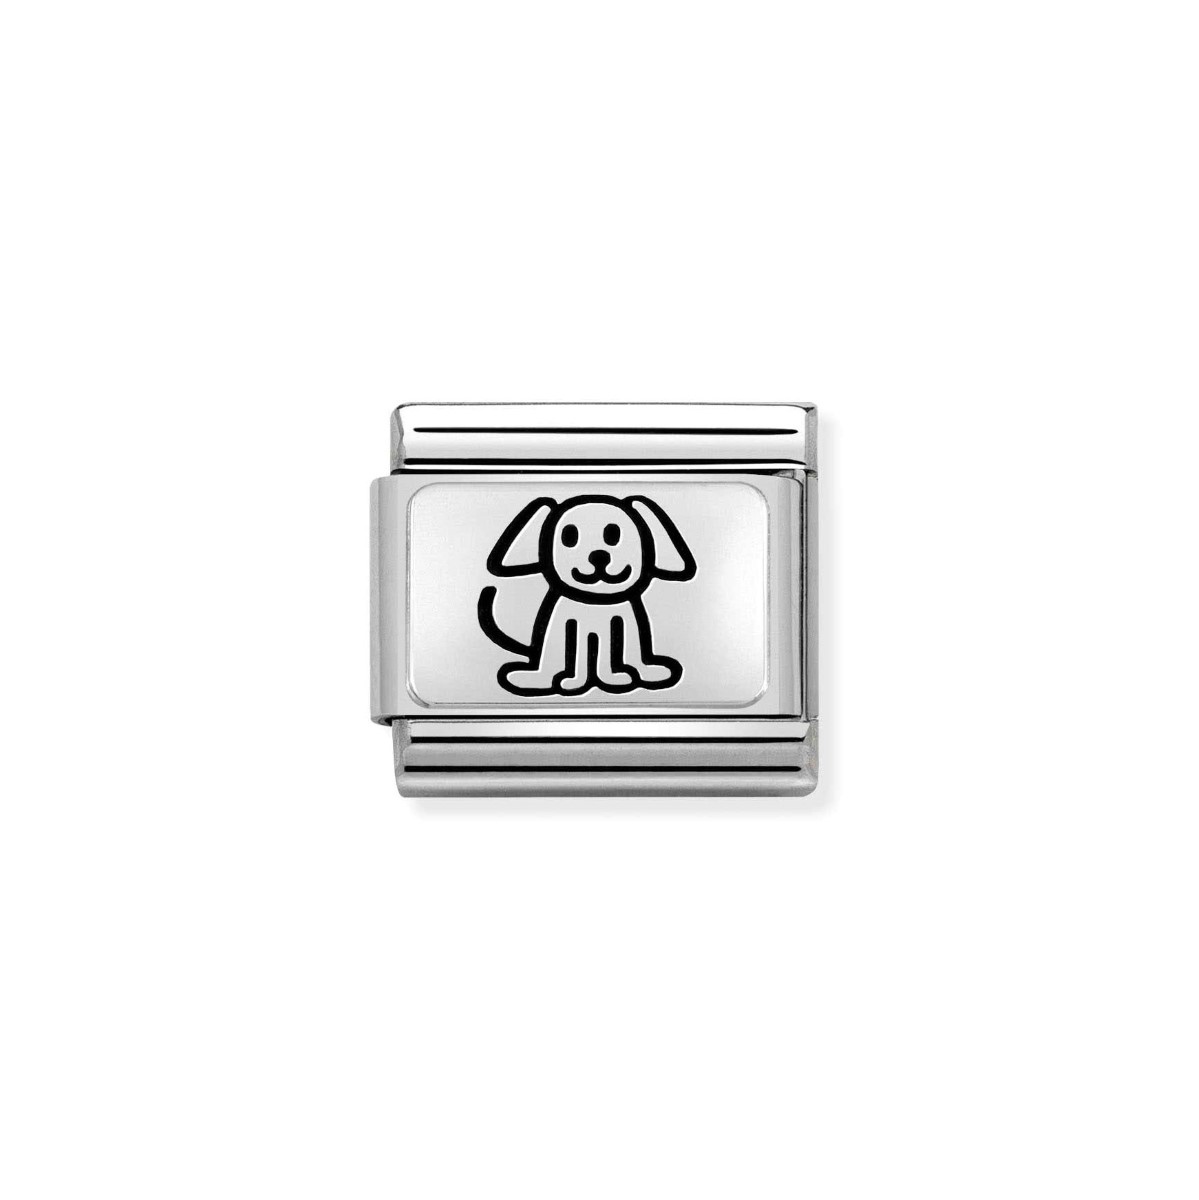 Nomination Classic Stainless Steel and Silver Charm - Family Dog